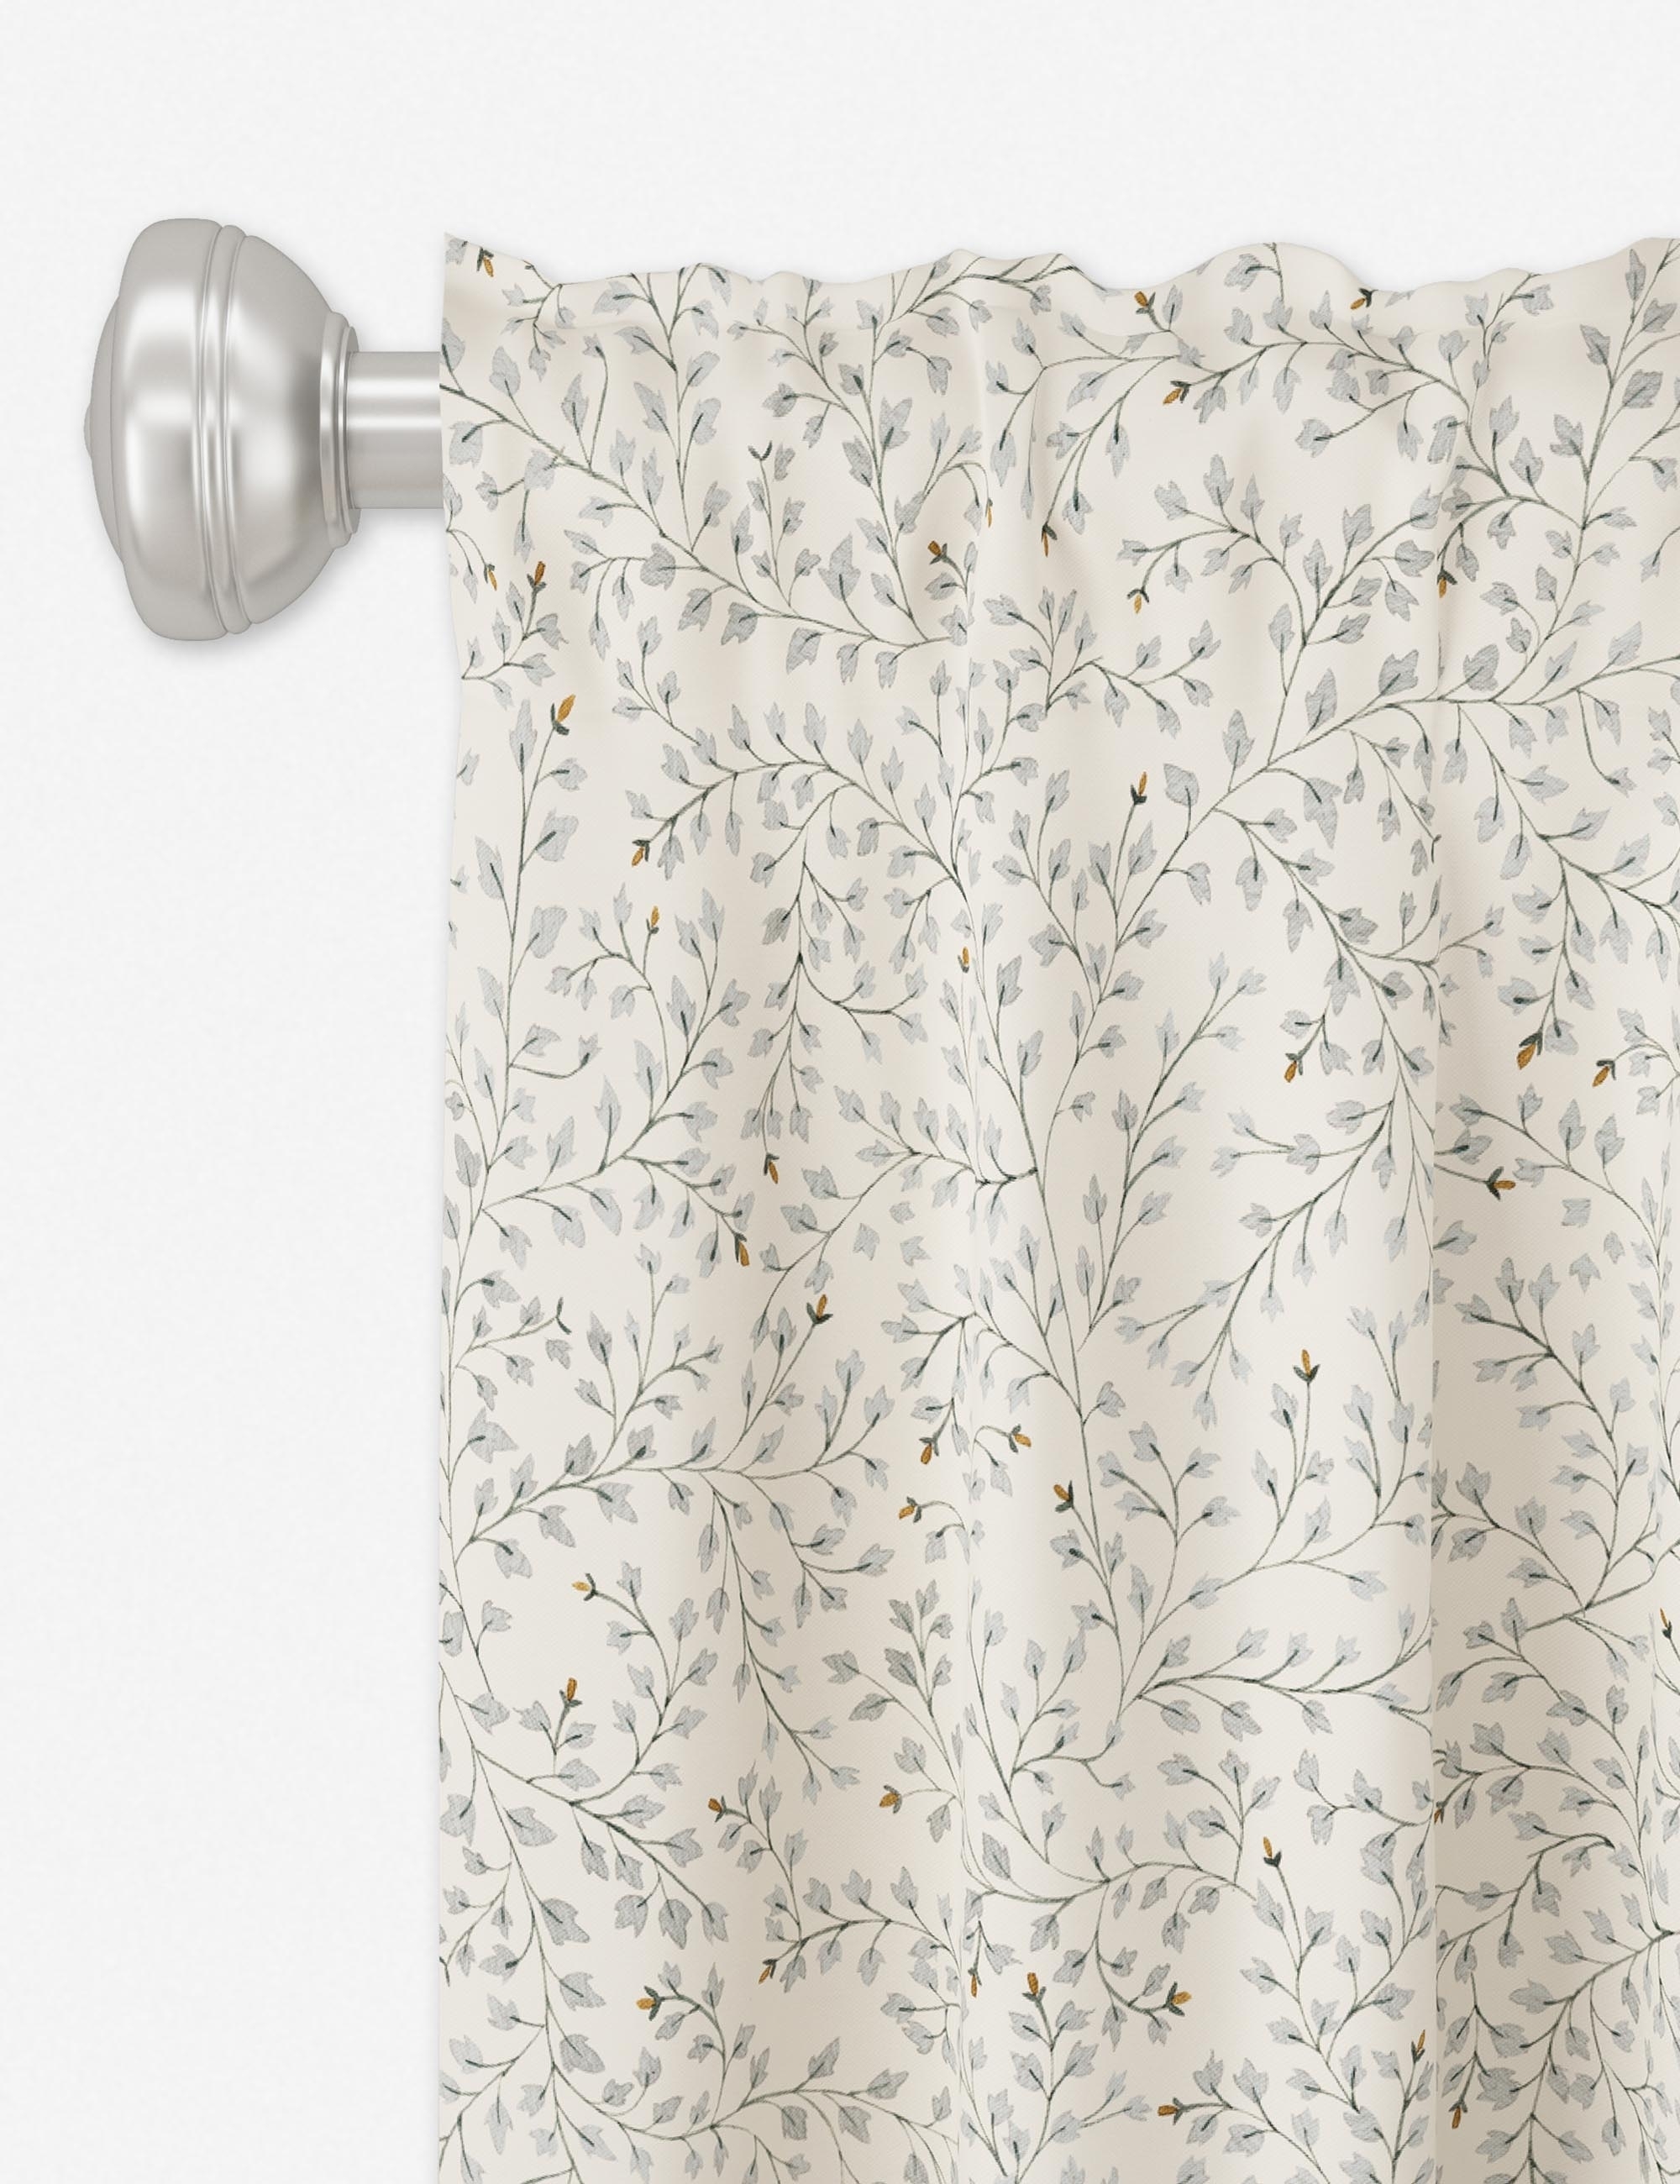 Rylee +Cru Curtain Panel, Dainty Leaves, 96" x 50" Unlined - Image 1